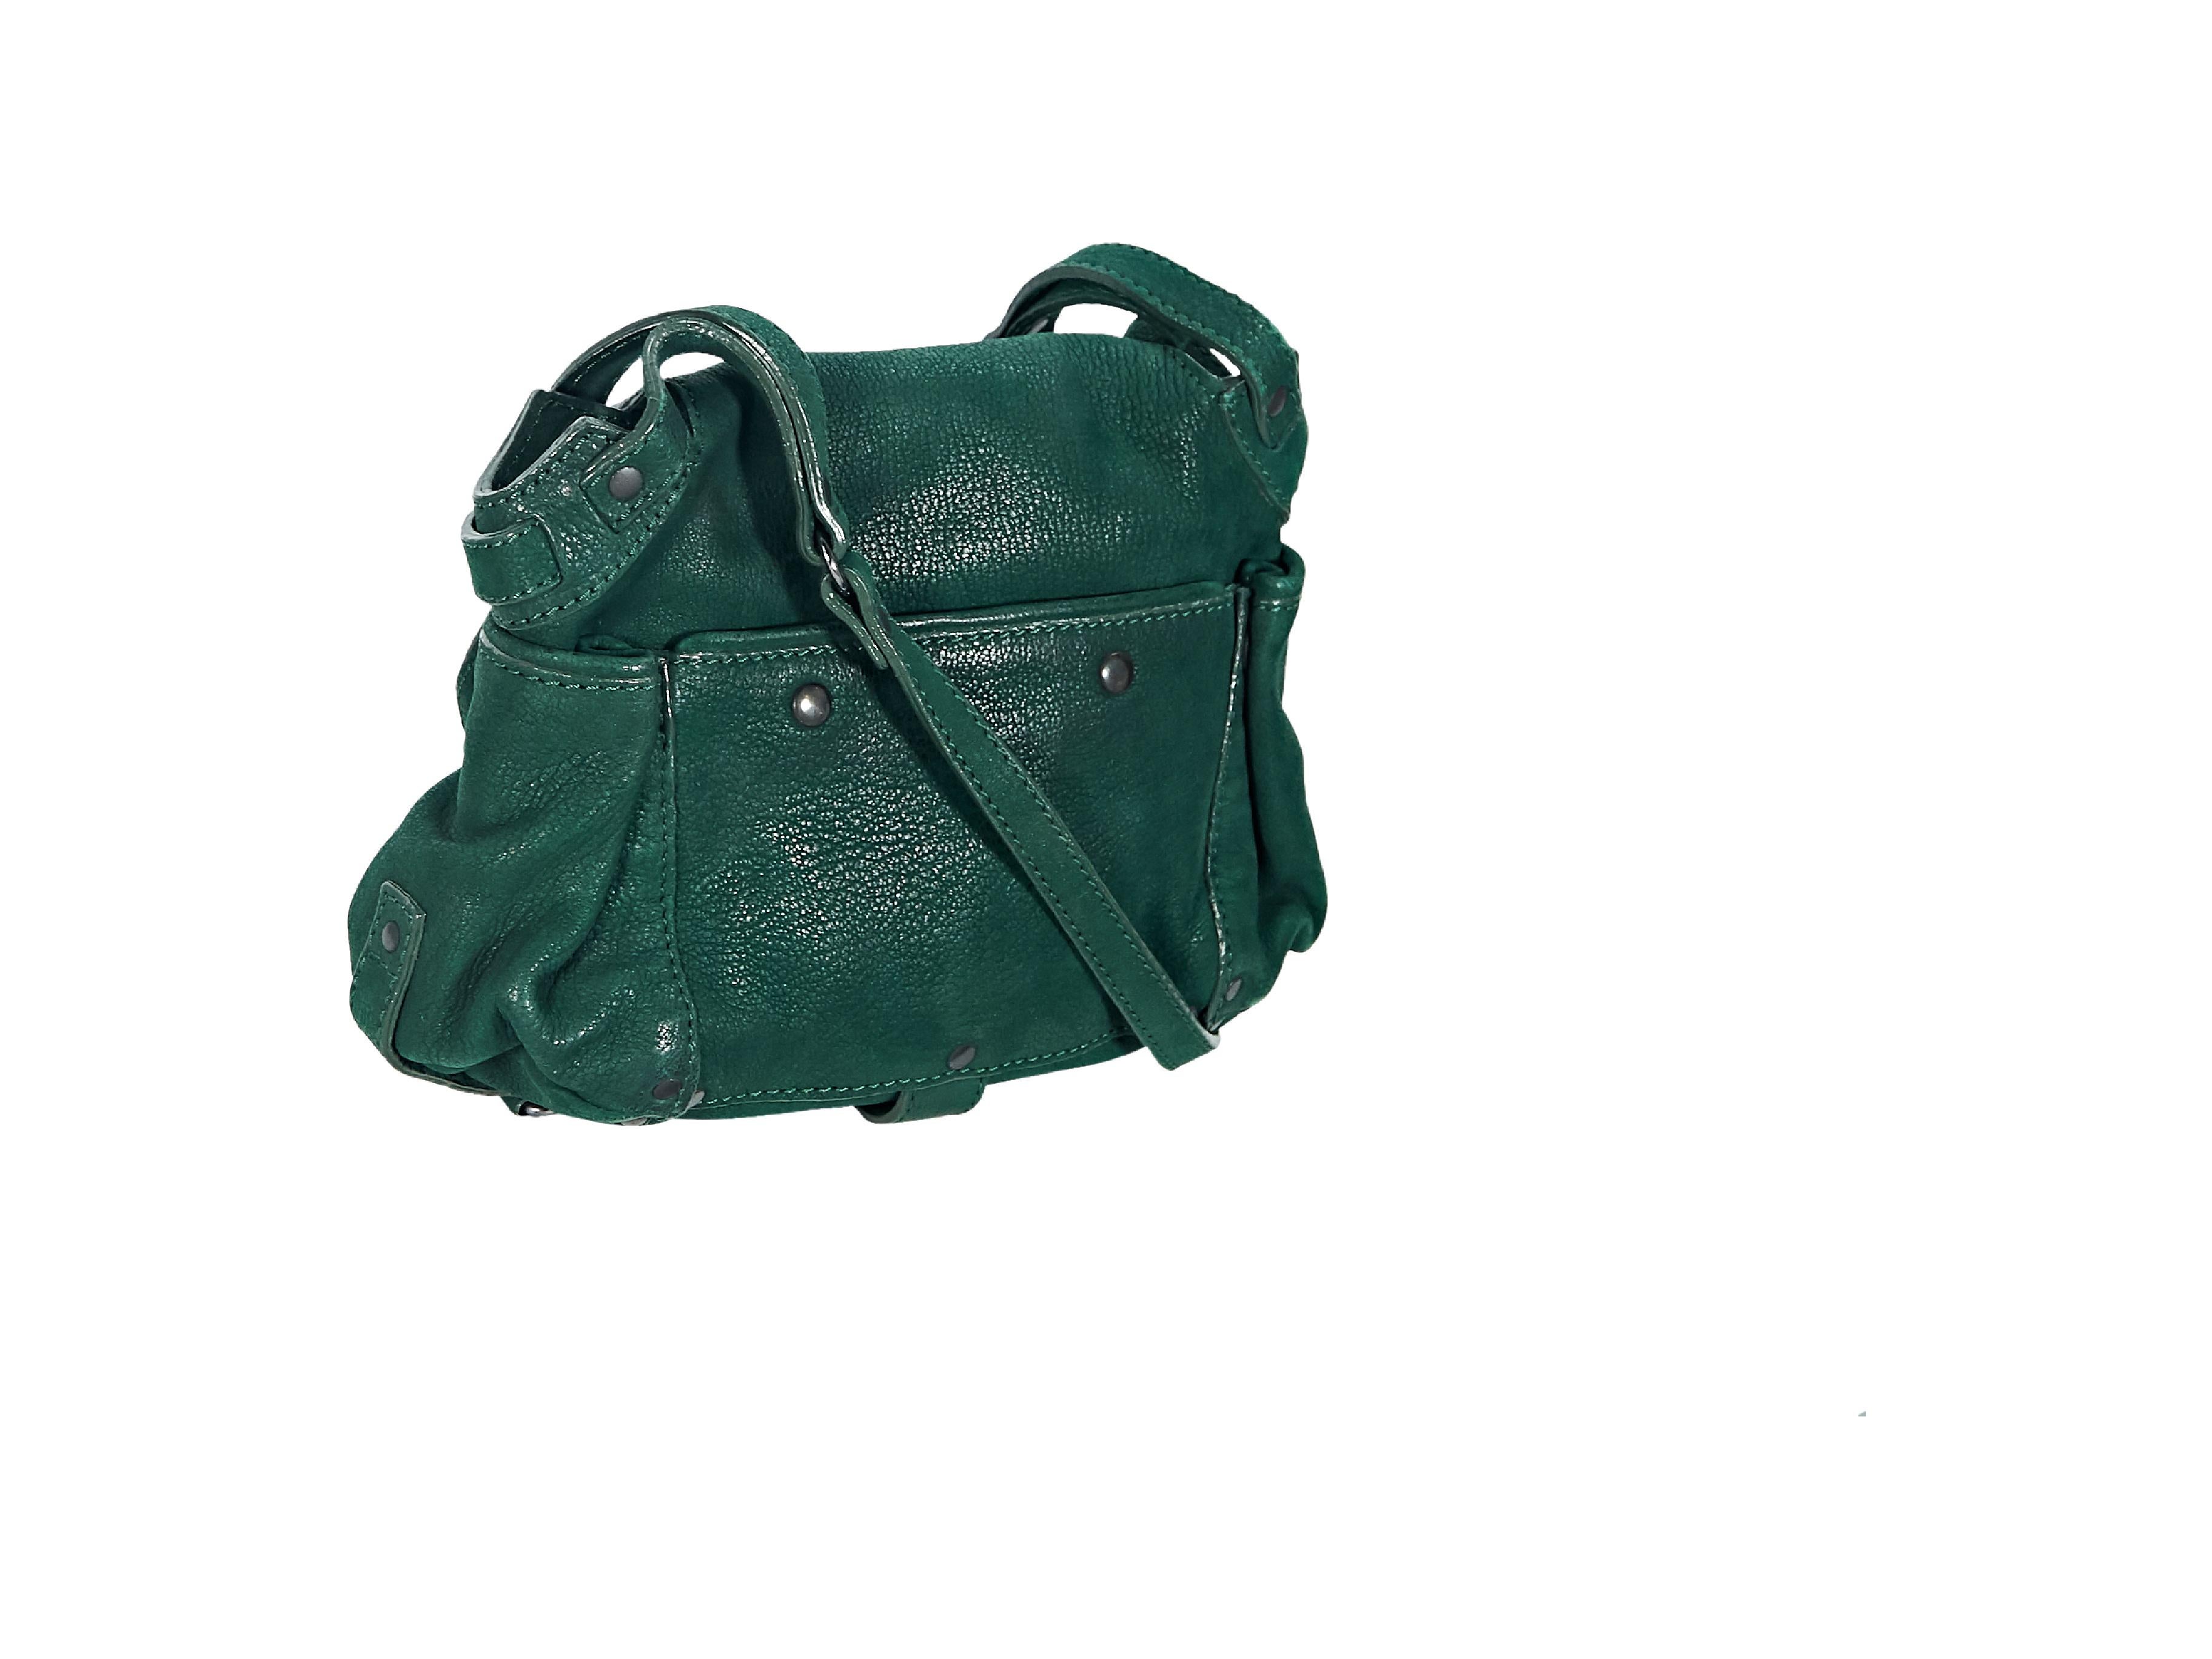 Product details:  Green leather Twee mini crossbody bag by Jerome Dreyfuss.  Adjustable crossbody strap.  Front flap with concealed zip pocket.  Concealed magnetic snap closure.  Lined interior with inner mirror, inner slide pocket and attached